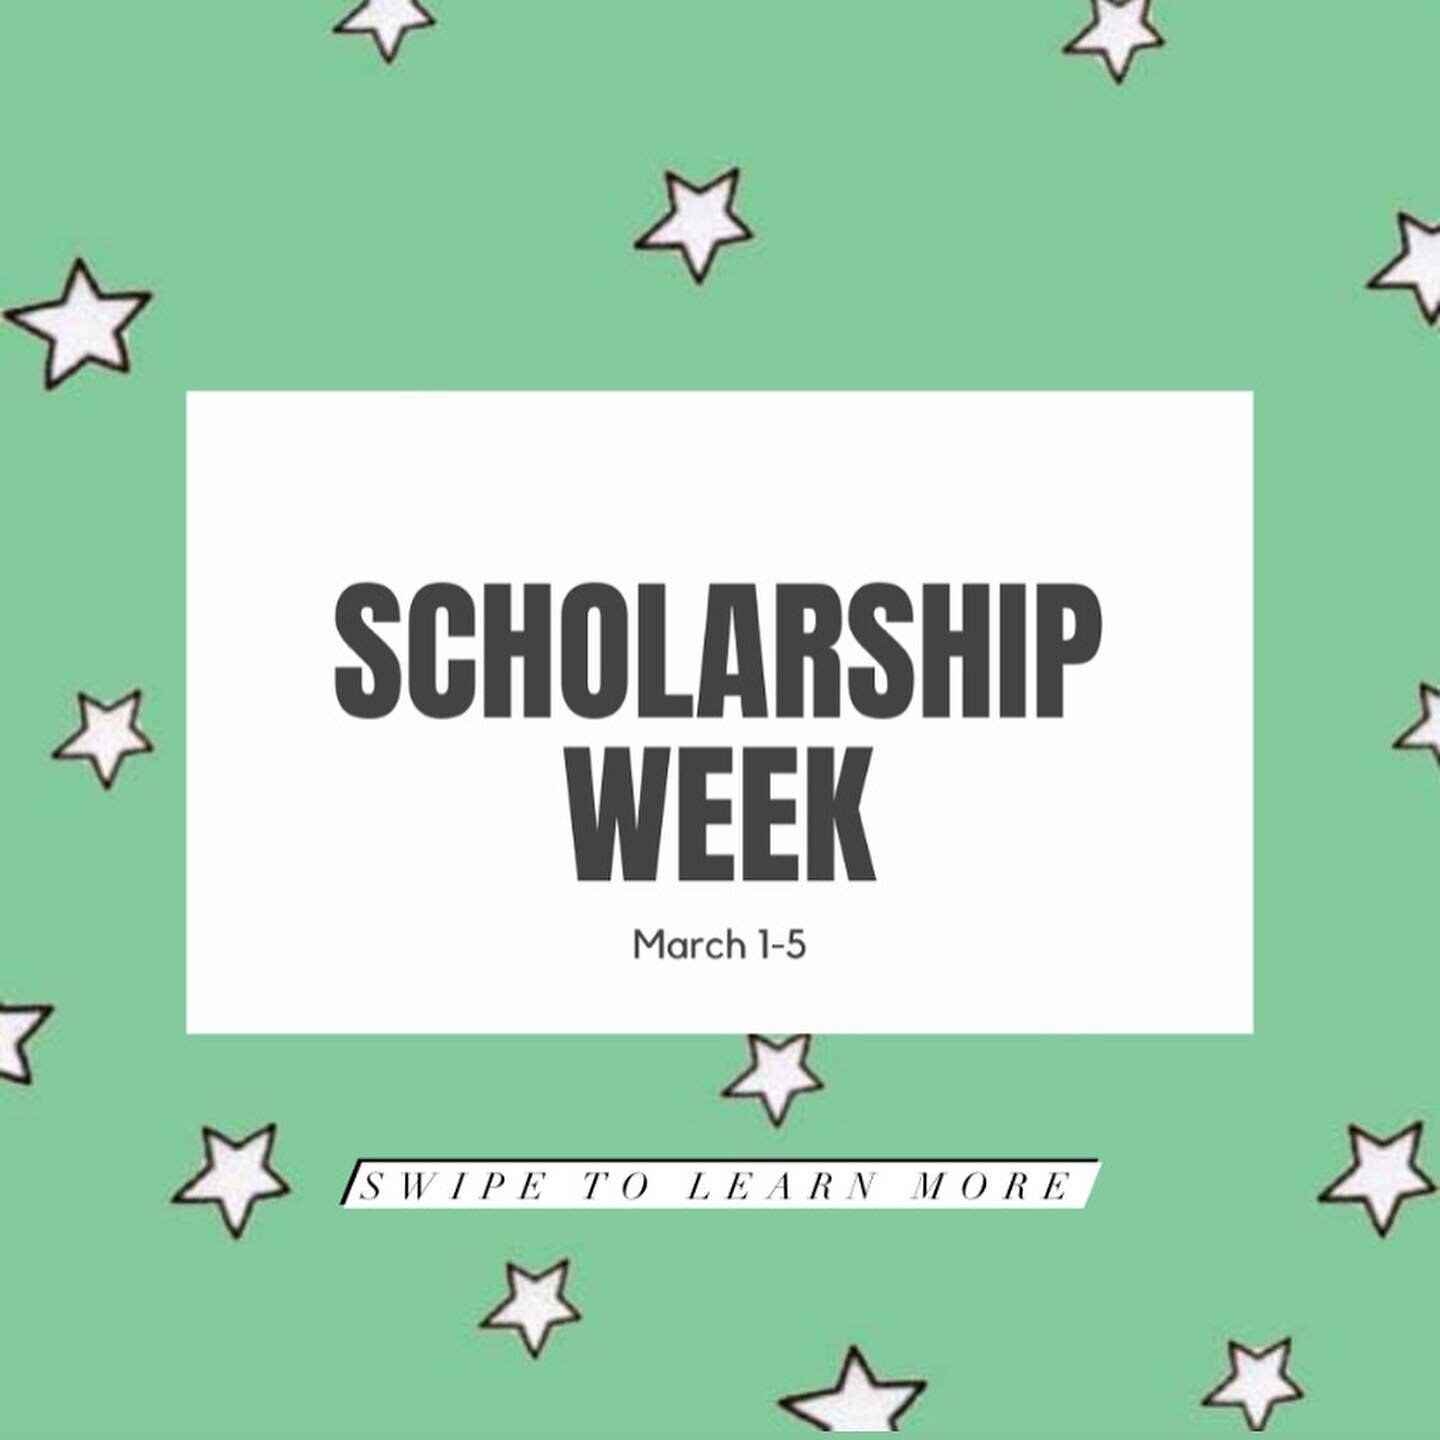 Scholarship Week is March 1-5!!

Links in bio to sign up for events🤍 #scholarshipweek